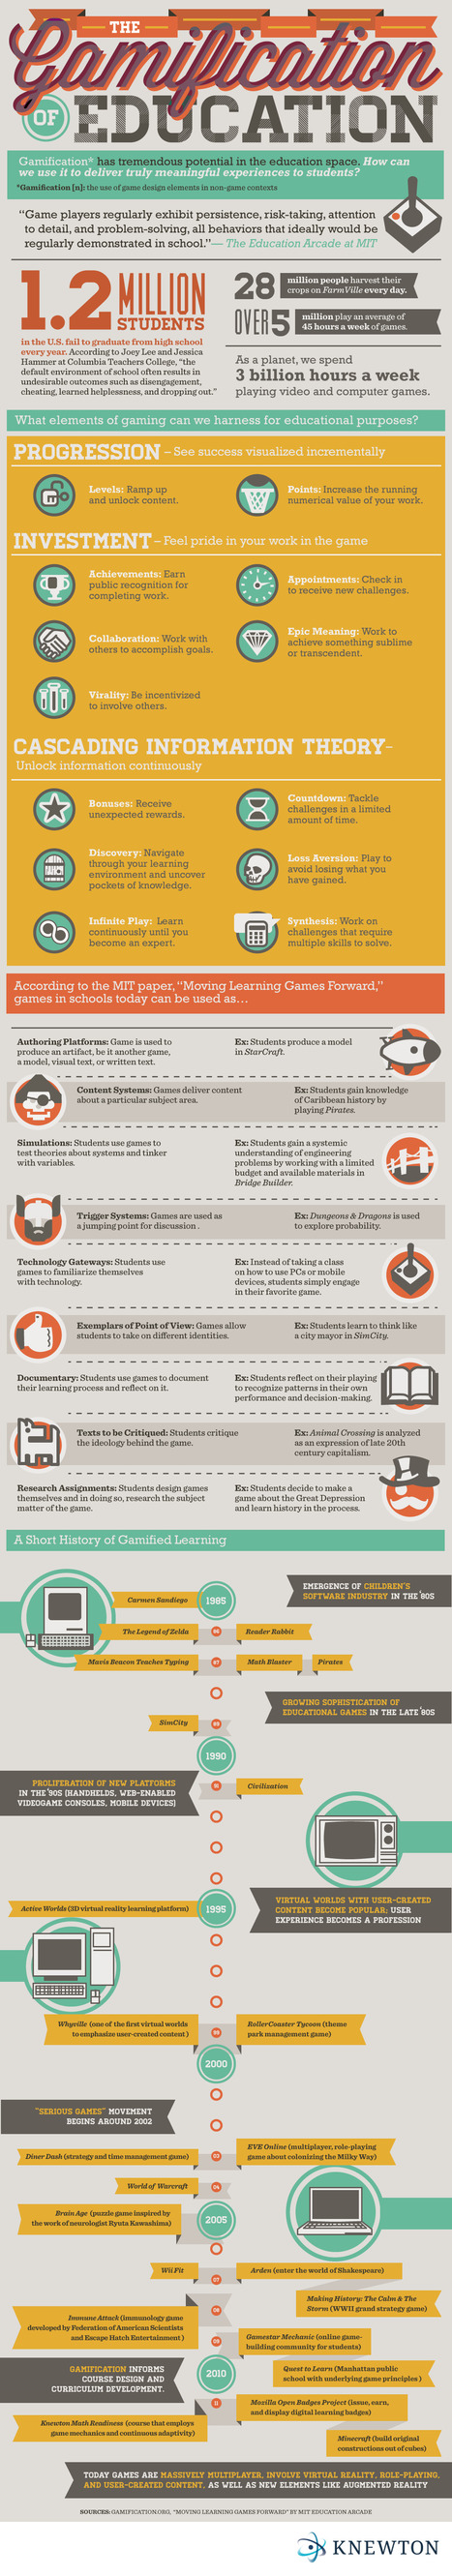 Inforgrafica su apprendimento e gamification - The Gamification of Education Infographic | Co-creation in health | Scoop.it